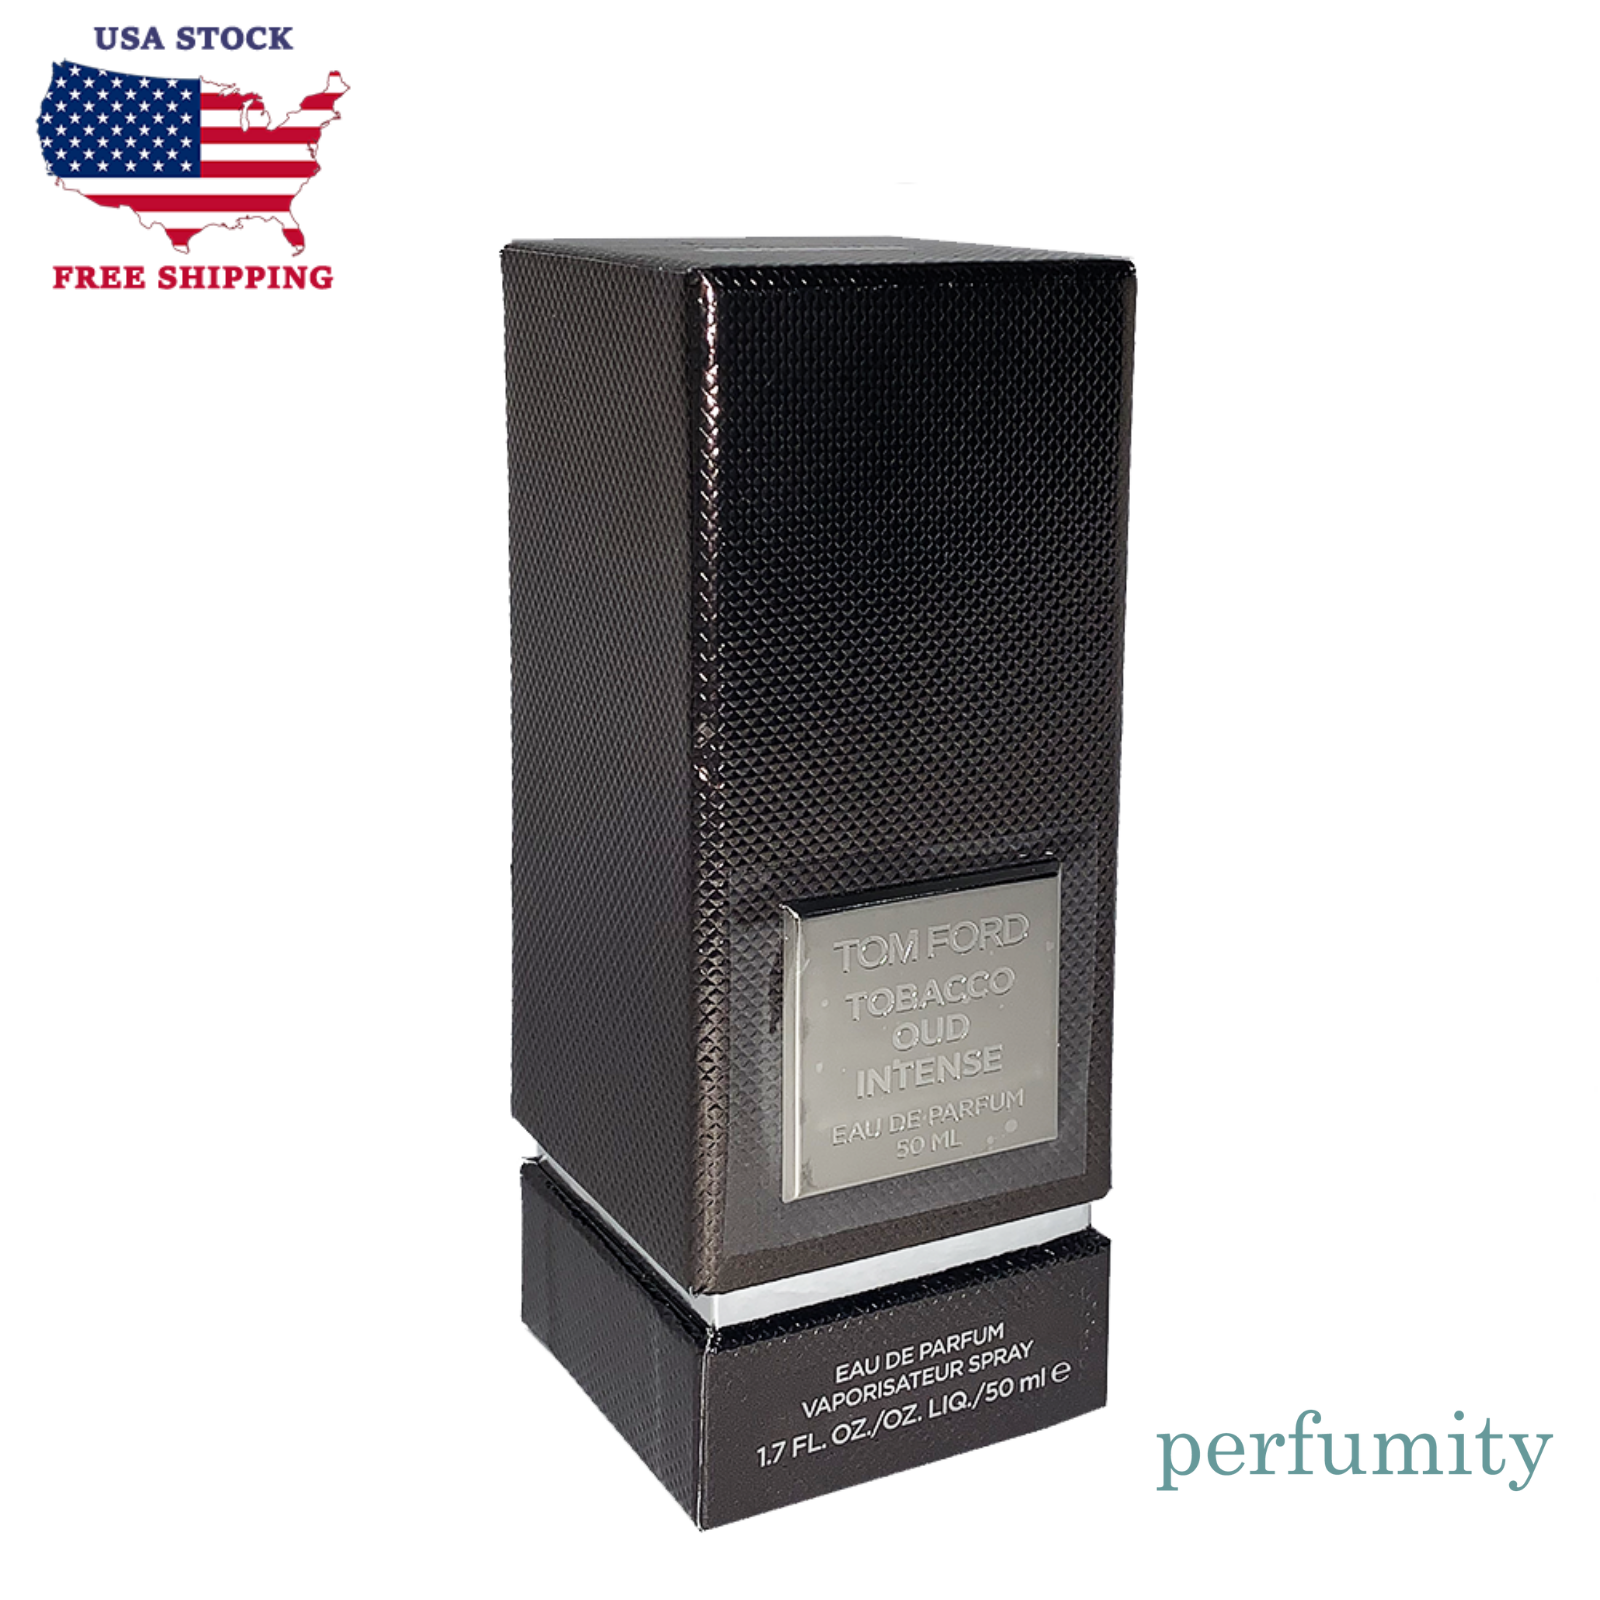 Primary image for Tom Ford Tobacco Oud Intense EDP Spray 50 ML NEW US STOCK DISCONTINUED